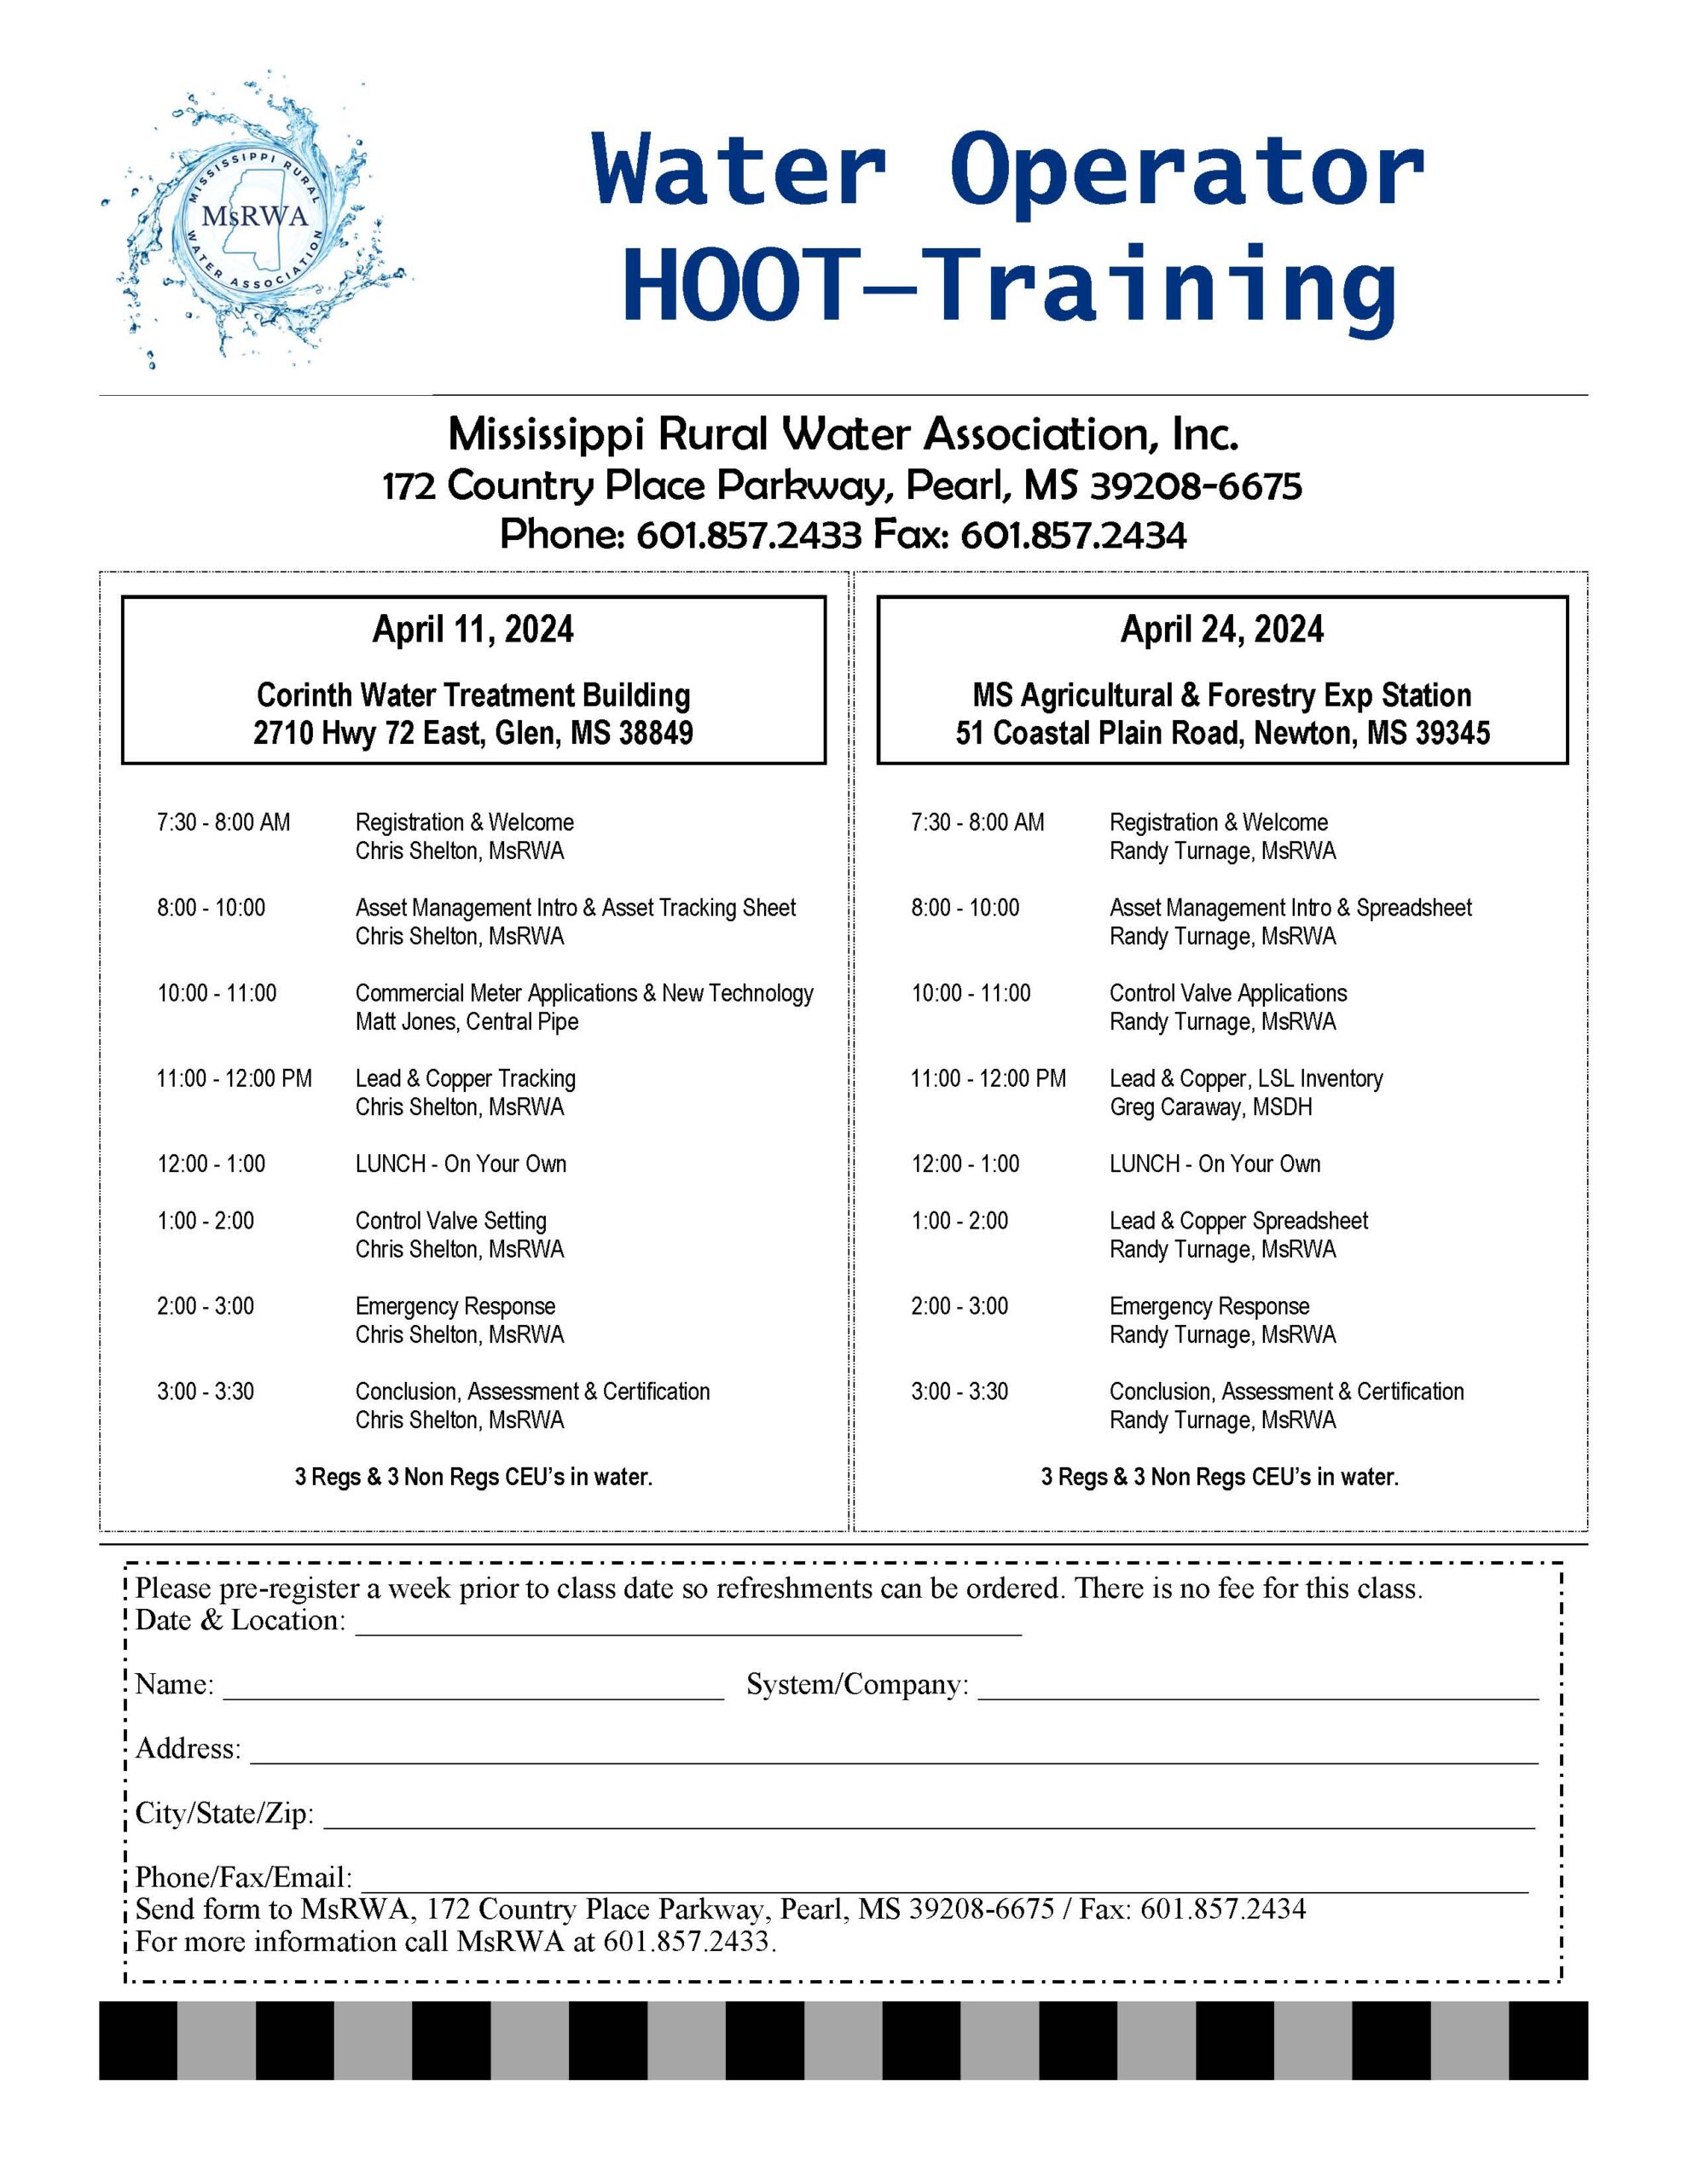 HOOT Training - 3R/3NR - Newton @ MS Agricultural & Forestry Exp Station